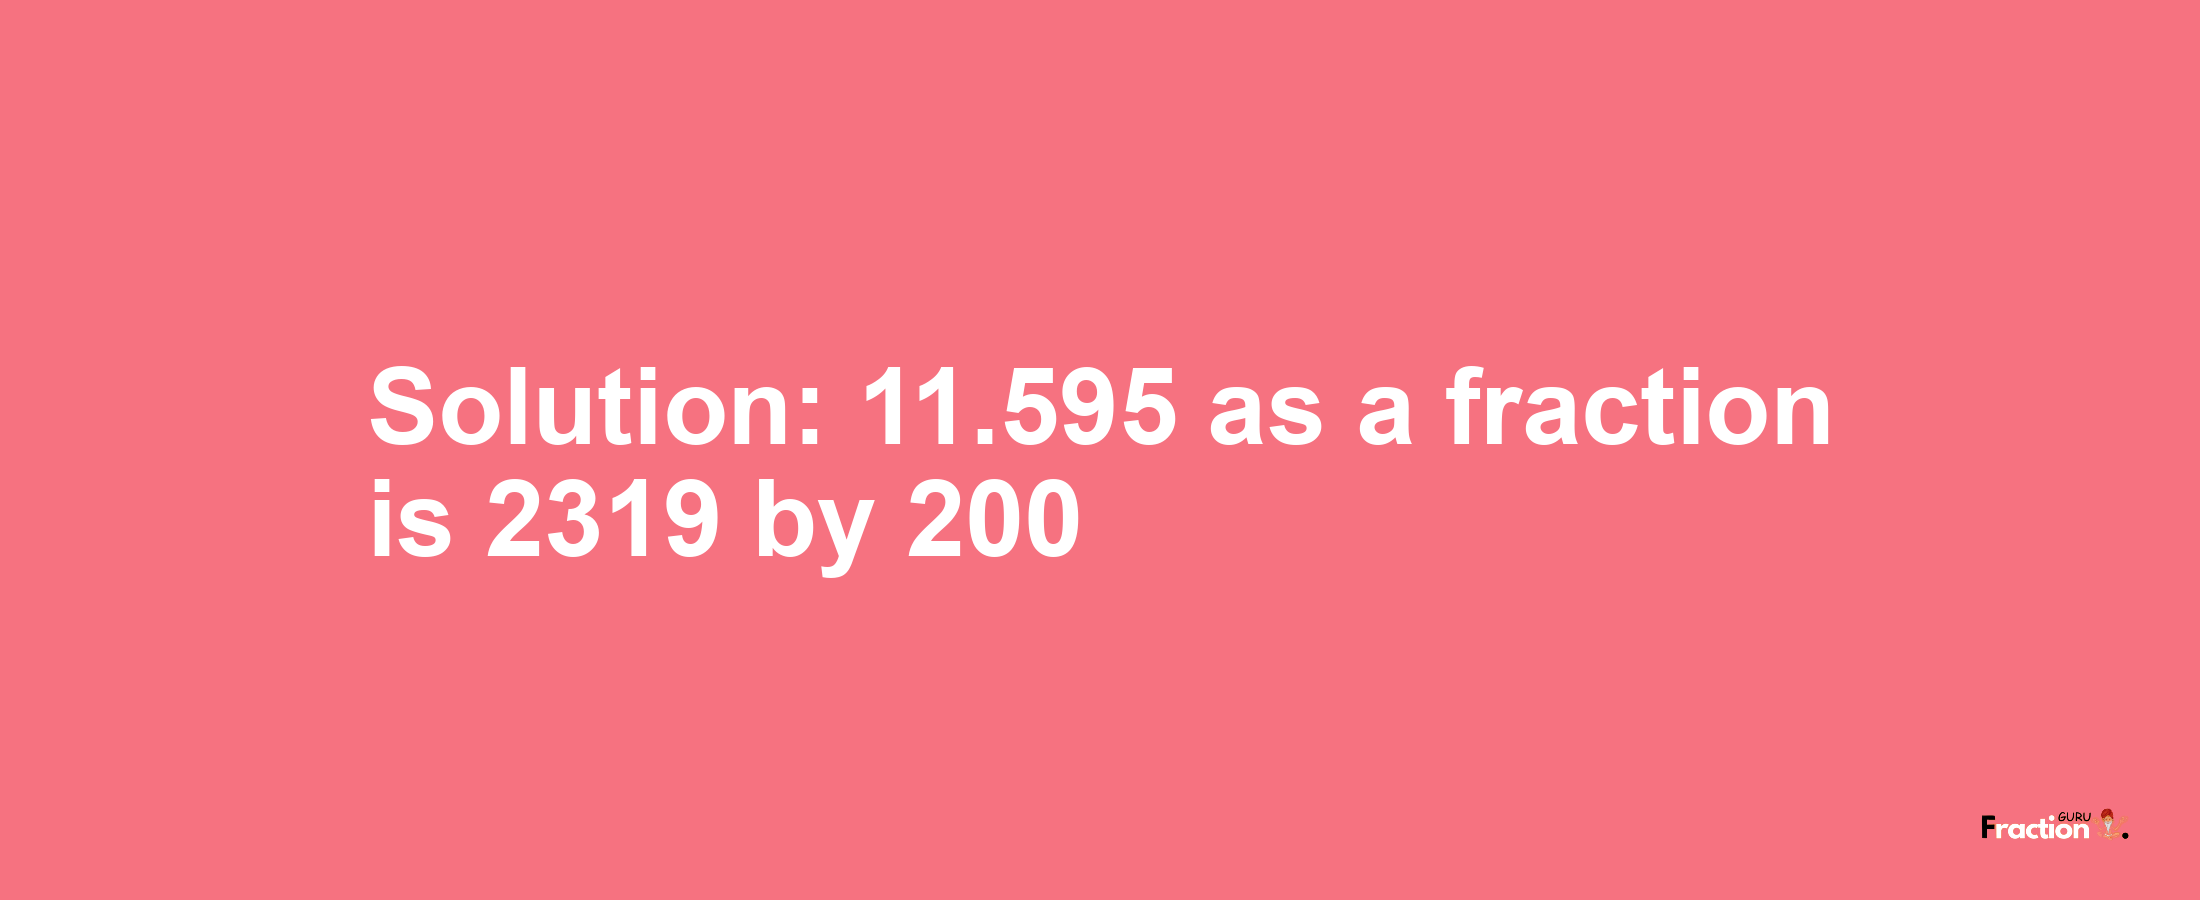 Solution:11.595 as a fraction is 2319/200